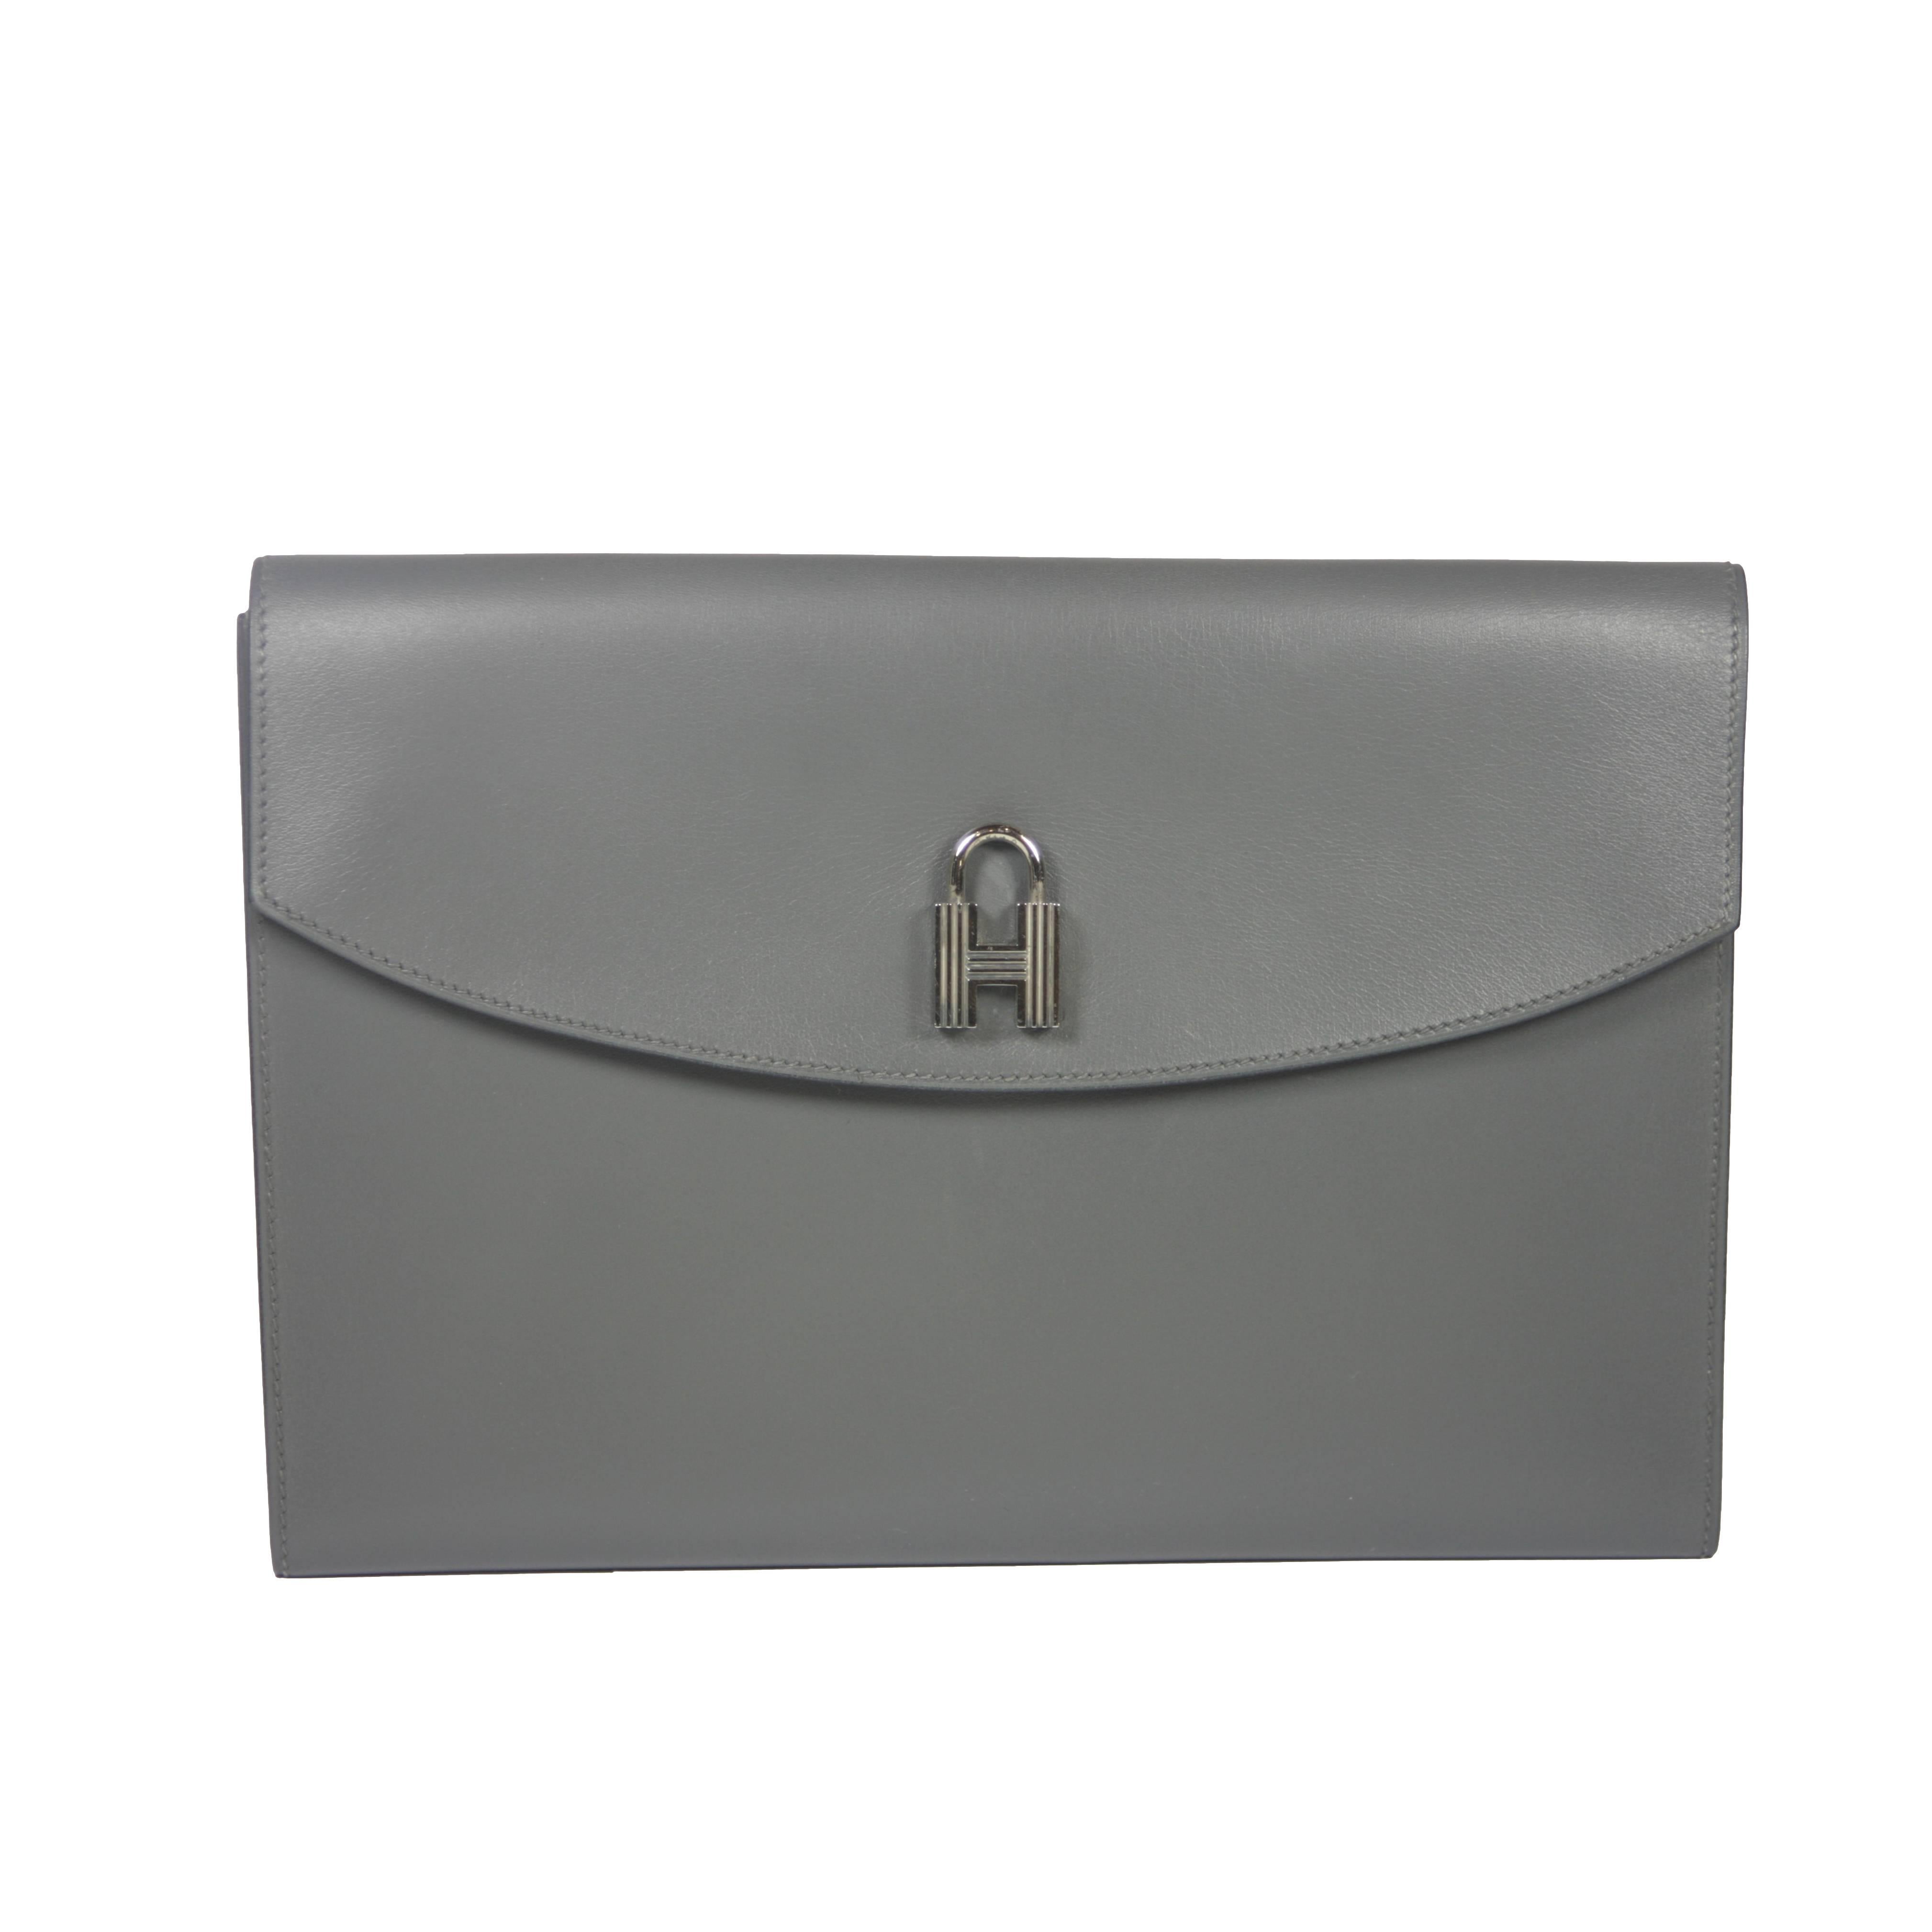 HERMES Grey Leather Envelope Clutch with Silver Padlock Detail